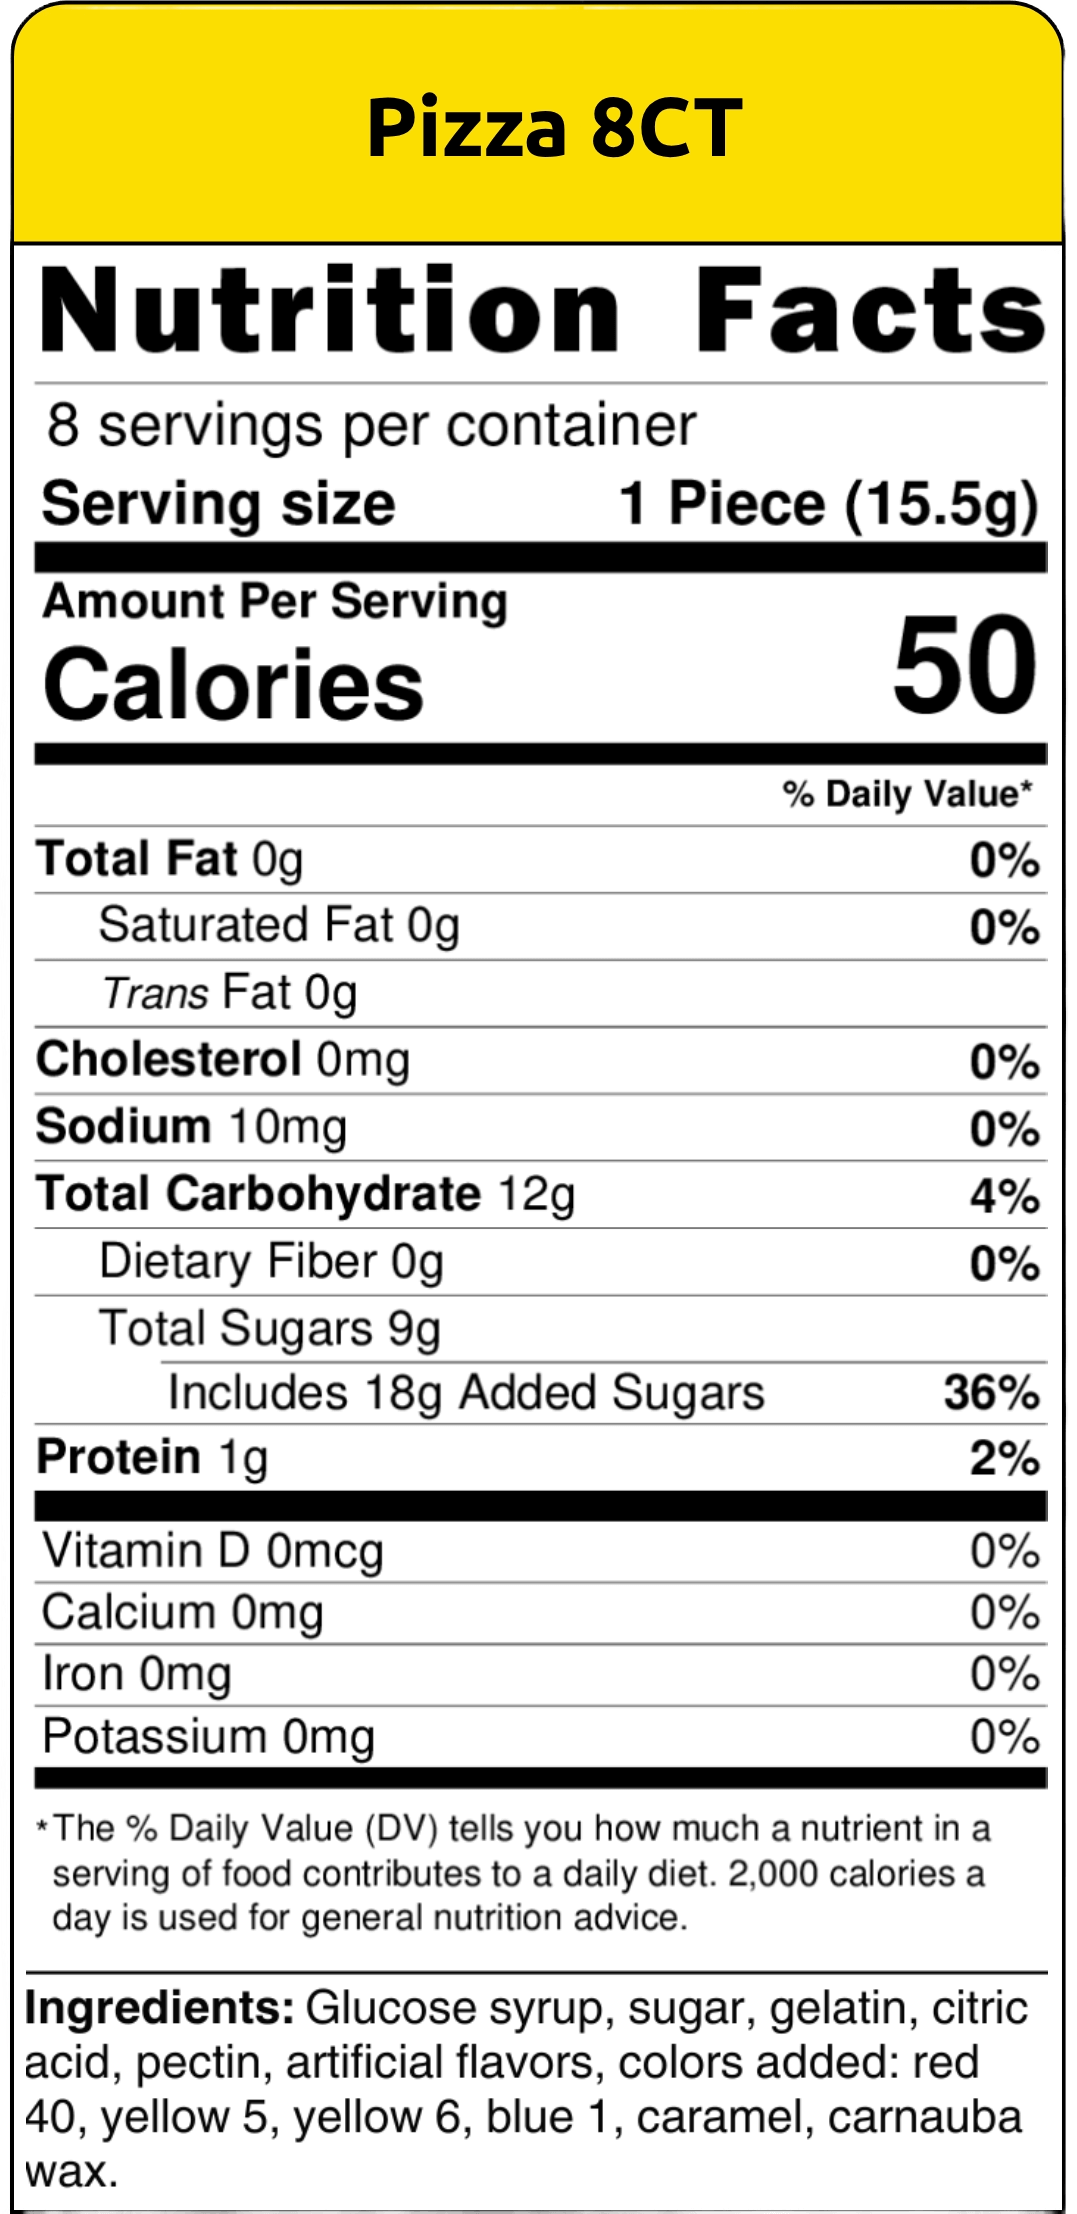 nutritional facts pizza 8ct